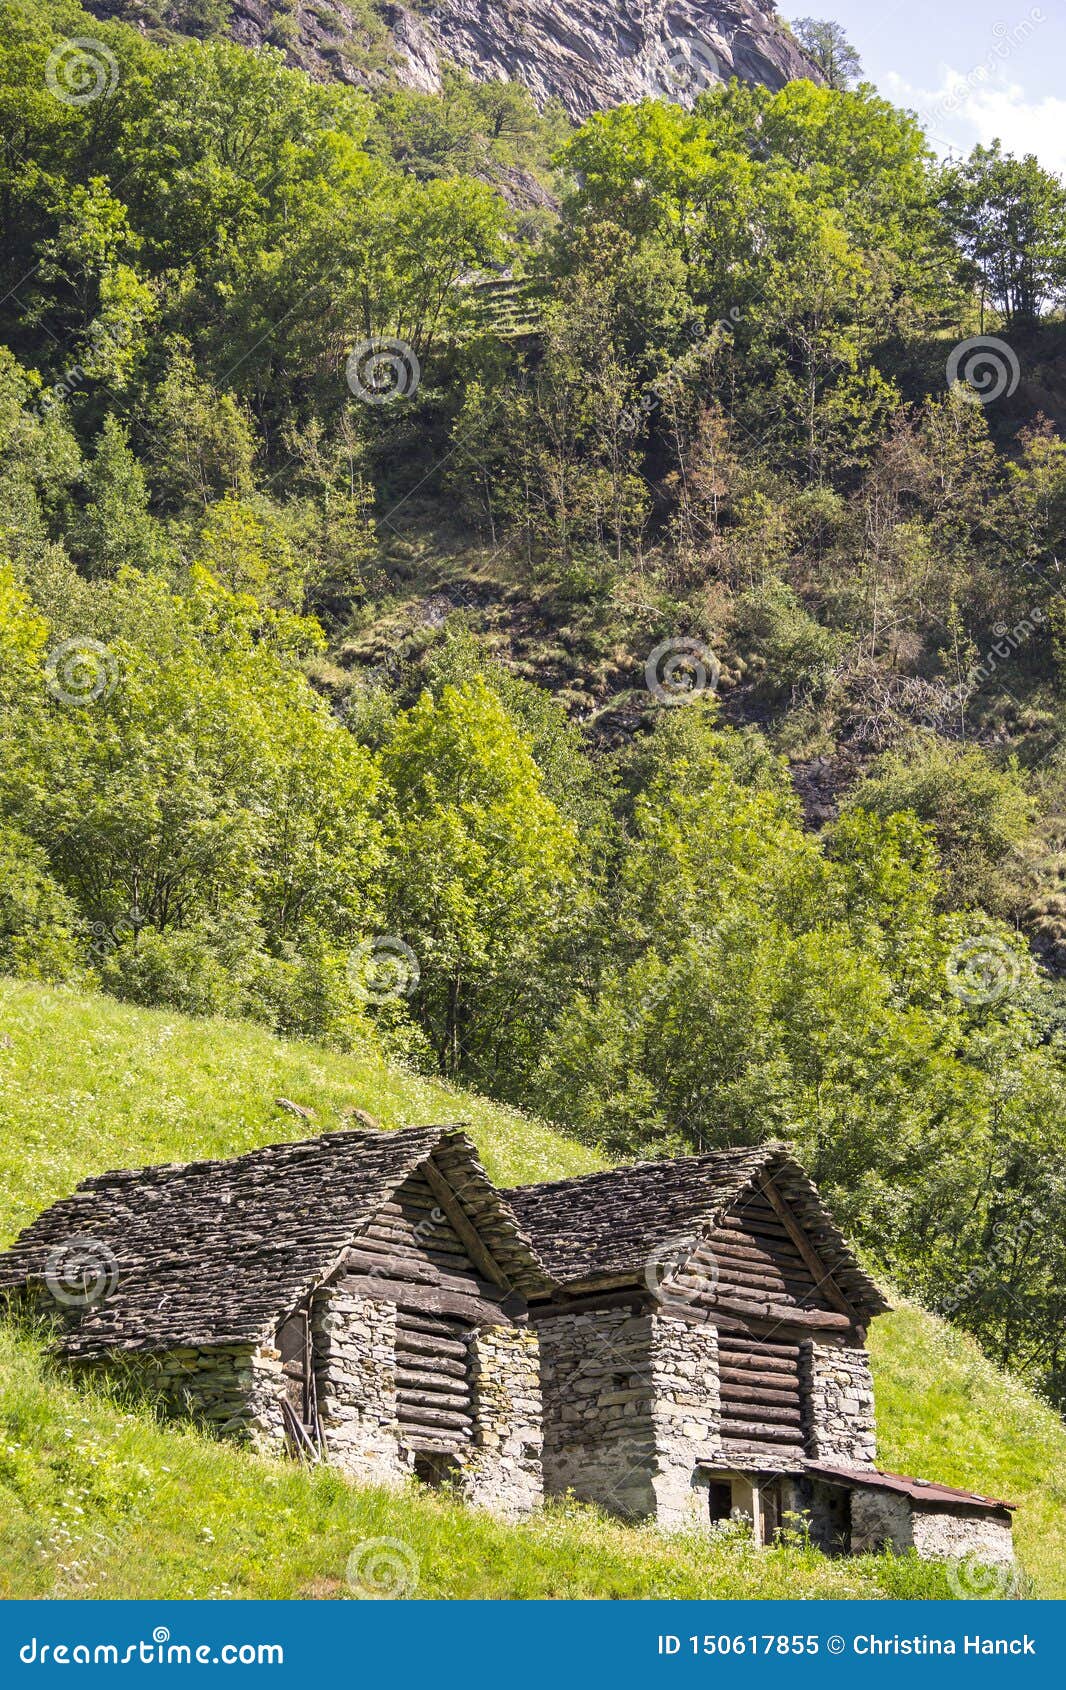 two little cabins, named rustico, switzerland